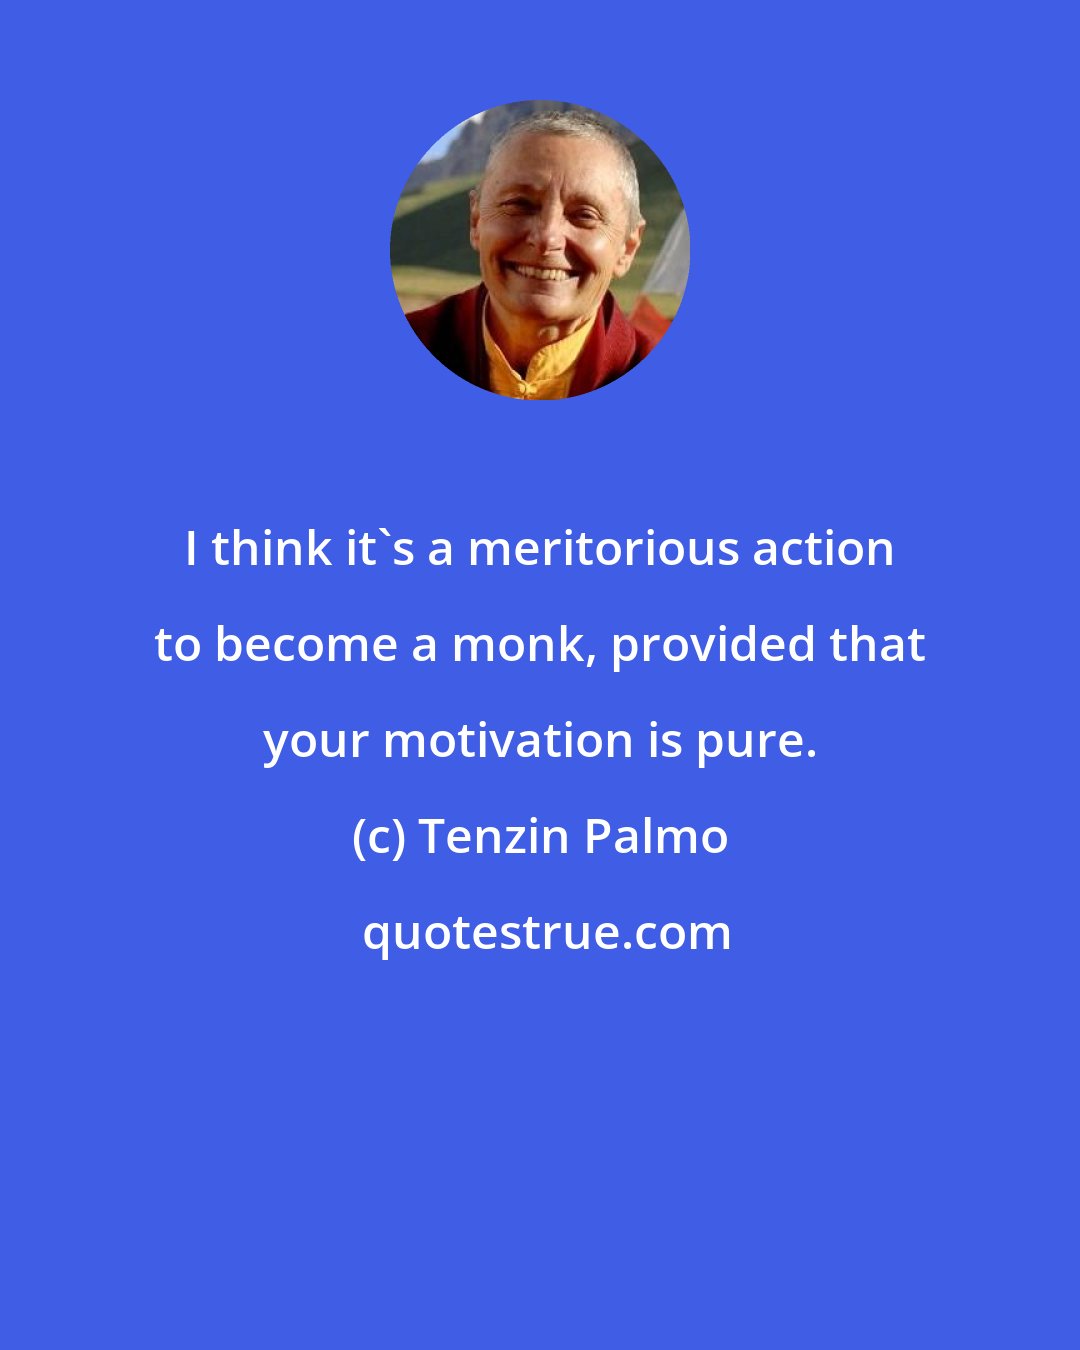 Tenzin Palmo: I think it's a meritorious action to become a monk, provided that your motivation is pure.